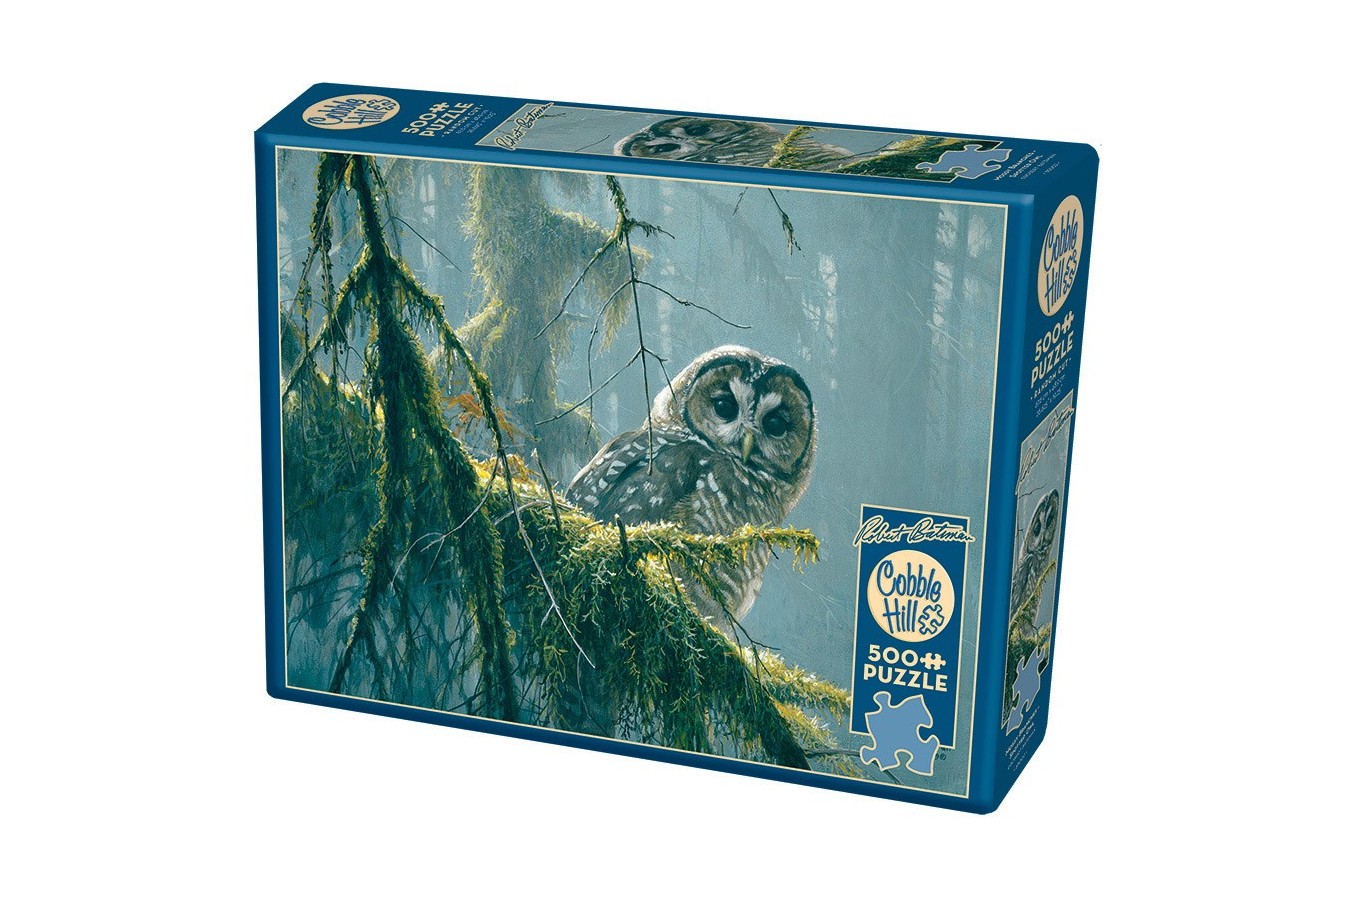 Puzzle Cobble Hill - Mossy Branches - Spotted Owl, 500 piese XXL (65000)